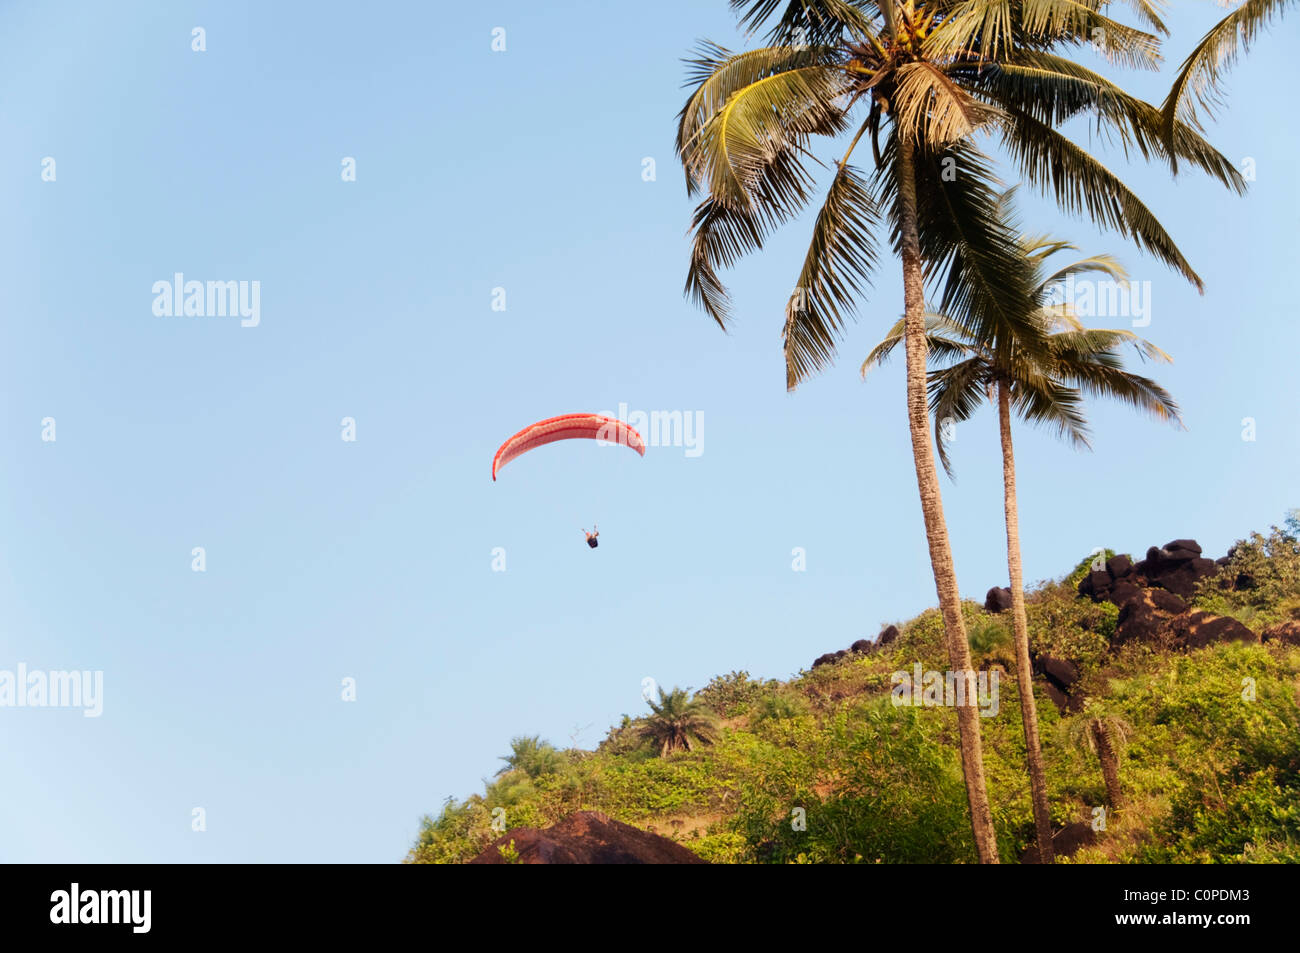 Low angle view of a paraglider flying, Goa, India Stock Photo